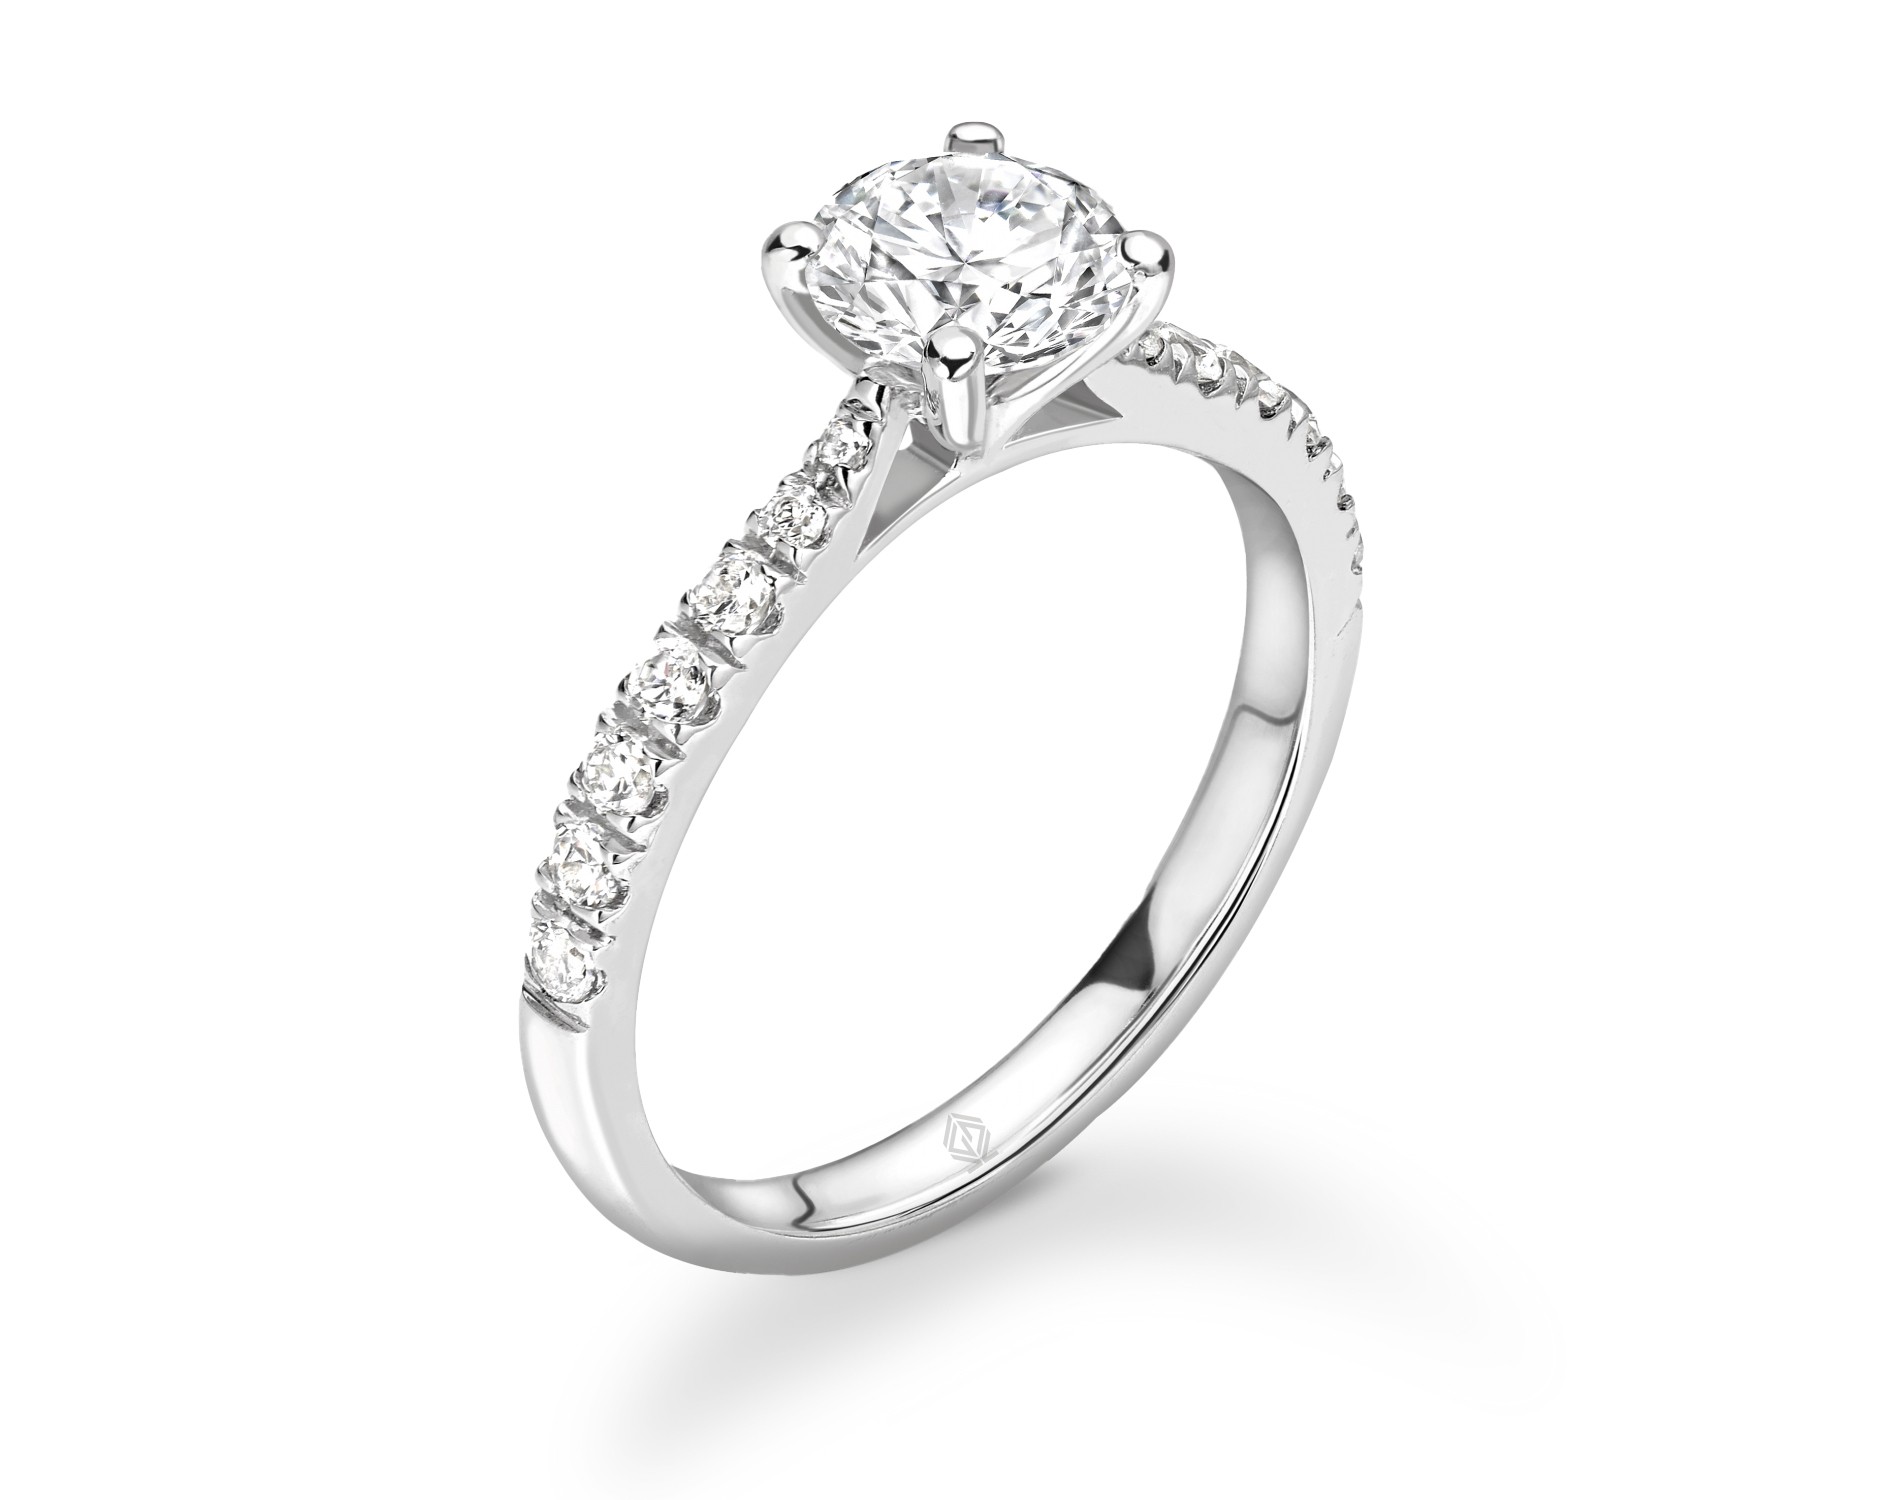 18K WHITE GOLD 4 PRONGS ROUND CUT DIAMOND ENGAGEMENT RING WITH SIDE STONES IN PAVE SET